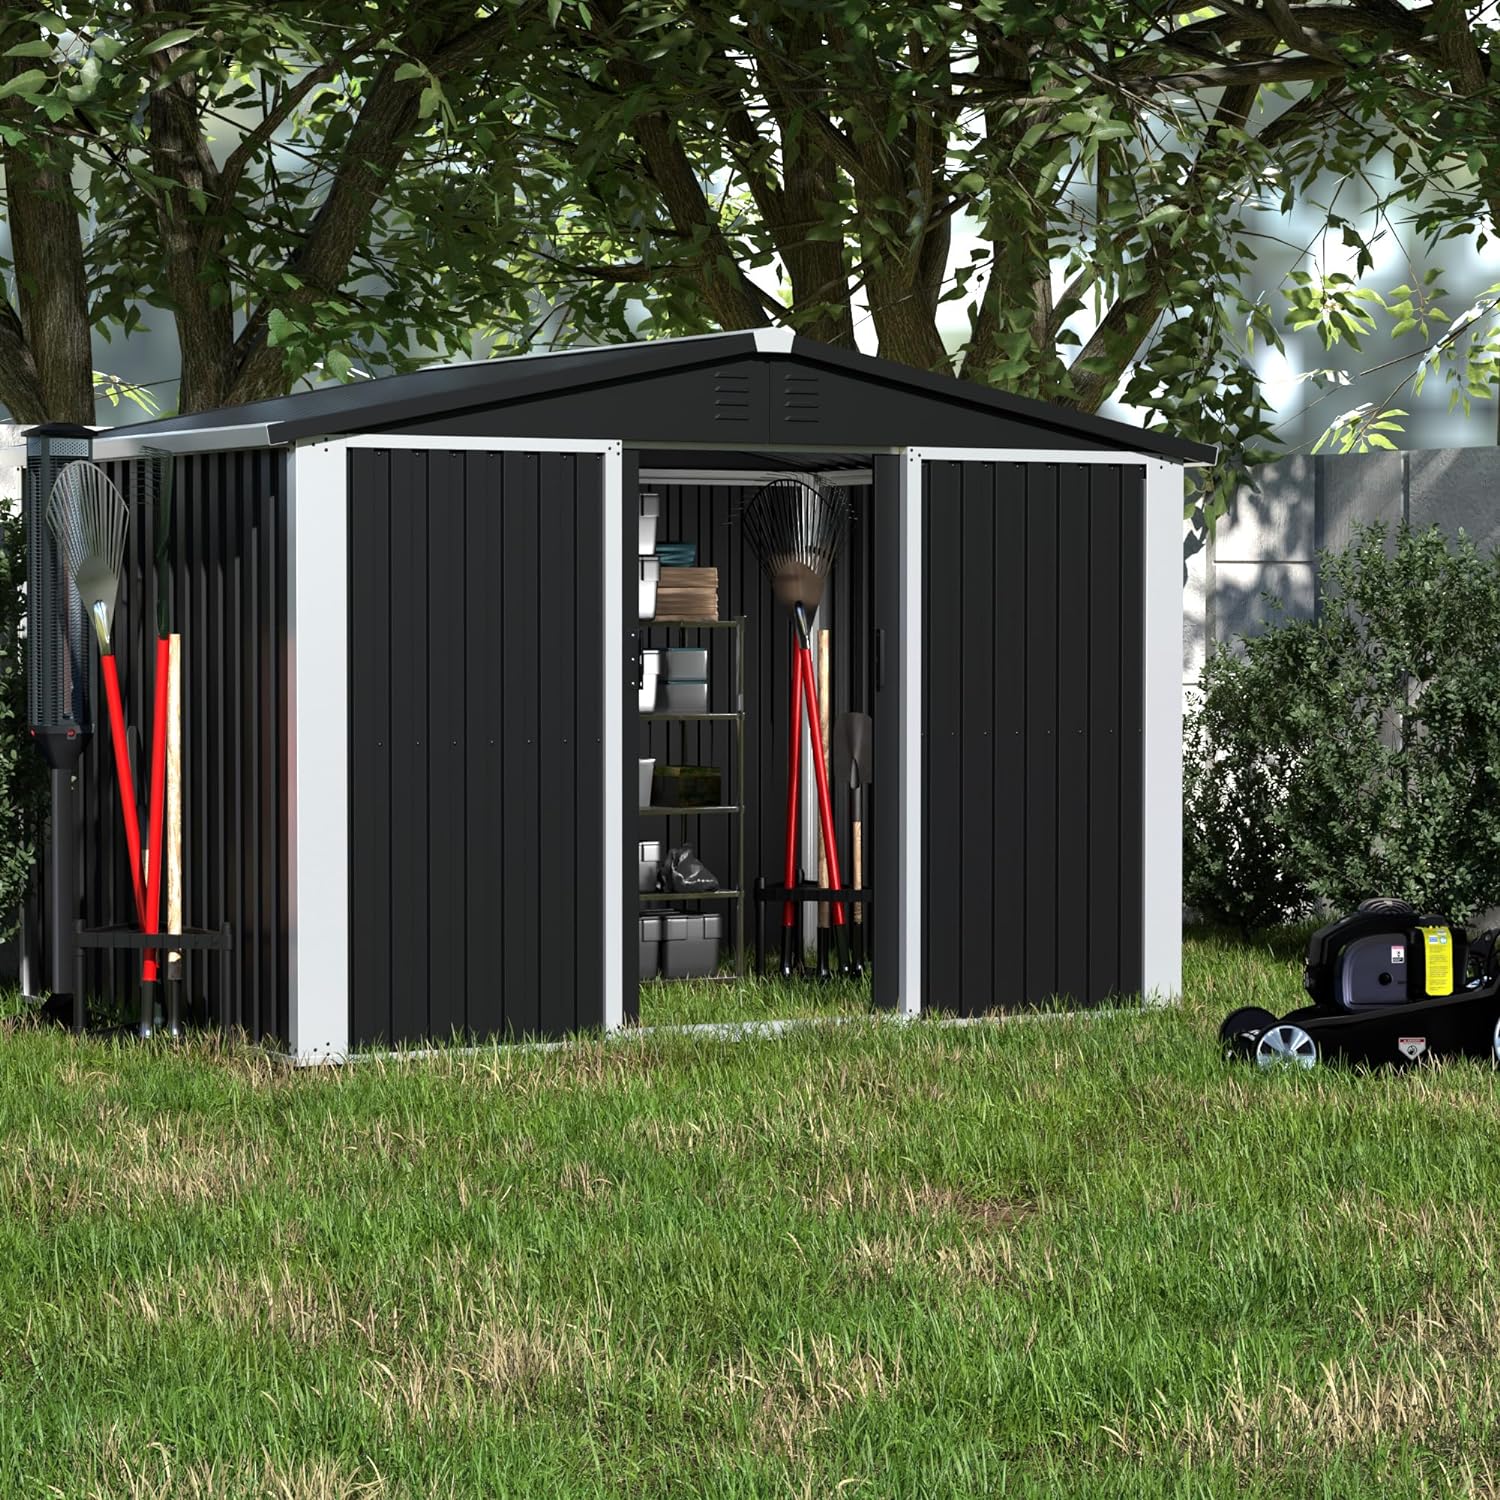 Yizosh Metal Outdoor Storage Shed, 8.6×6.3 FT Steel Utility Tool Shed Storage House with Sliding Door, Metal Sheds Outdoor Storage for Backyard Garden Patio Lawn (H6'xW8.6'x D6.3') Black&White